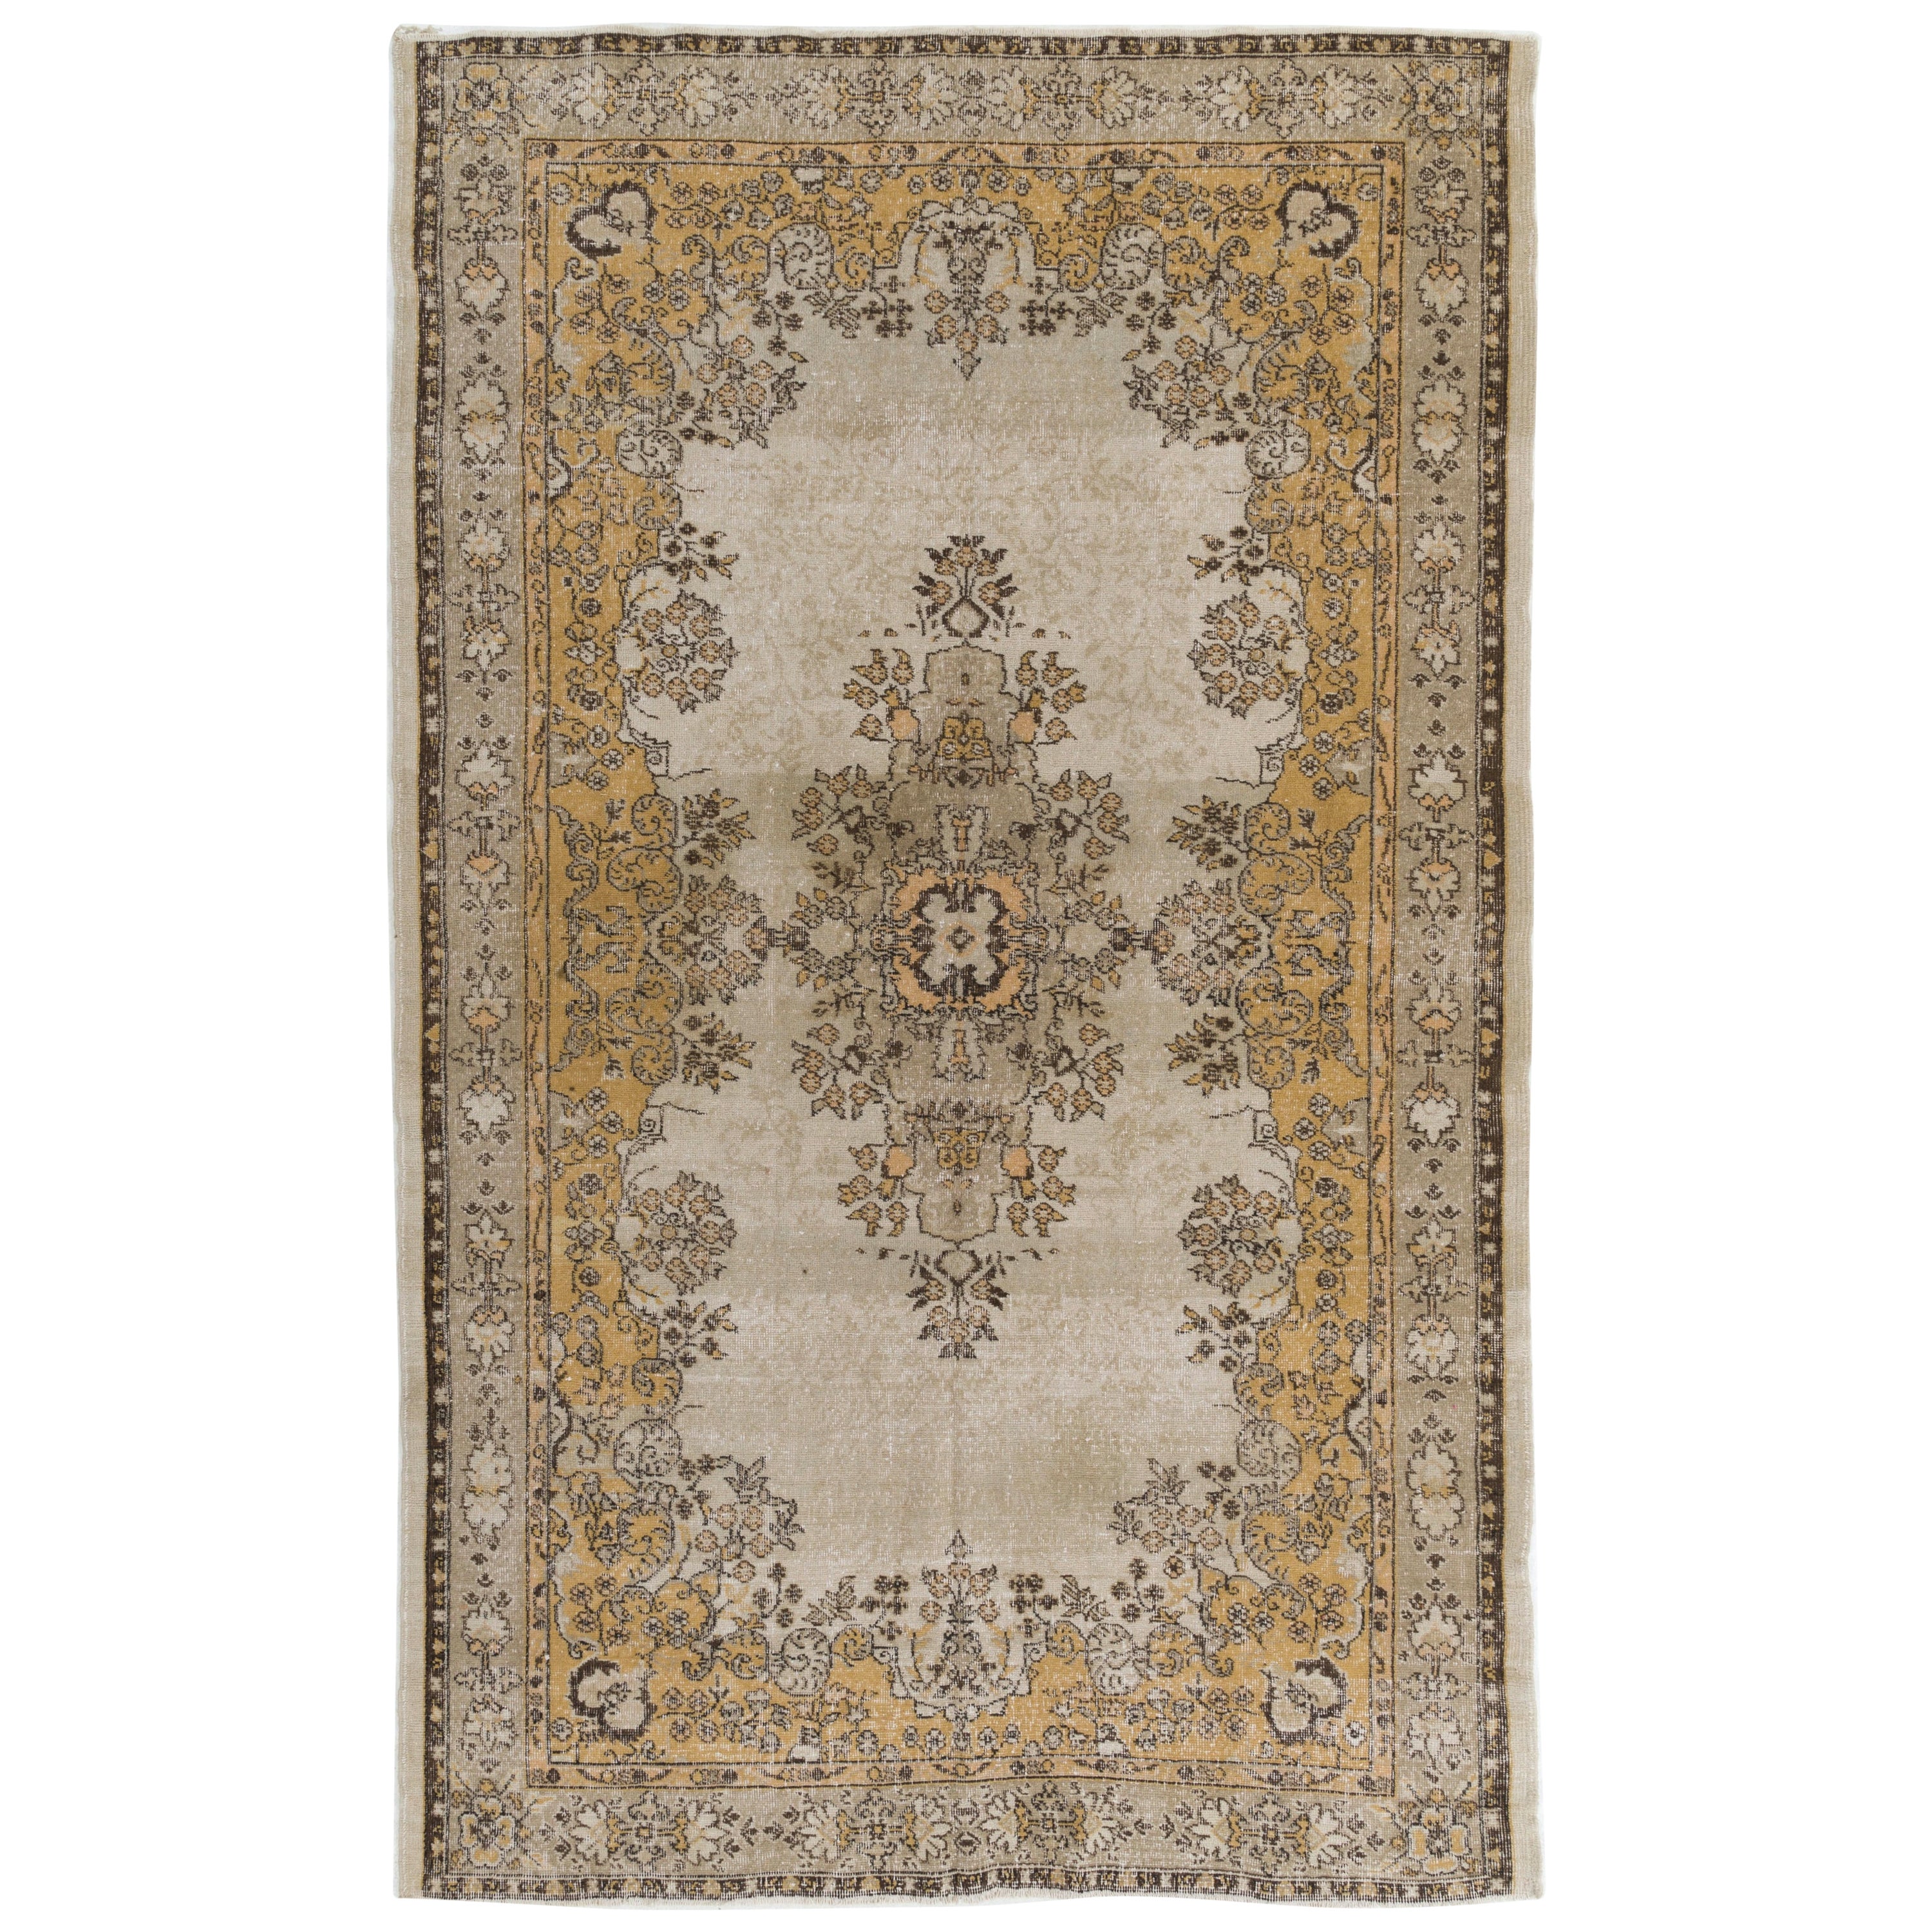 6.7x10.6 Ft Fine Vintage Turkish Rug in Light Gray, Brown, Rust and Beige Colors For Sale